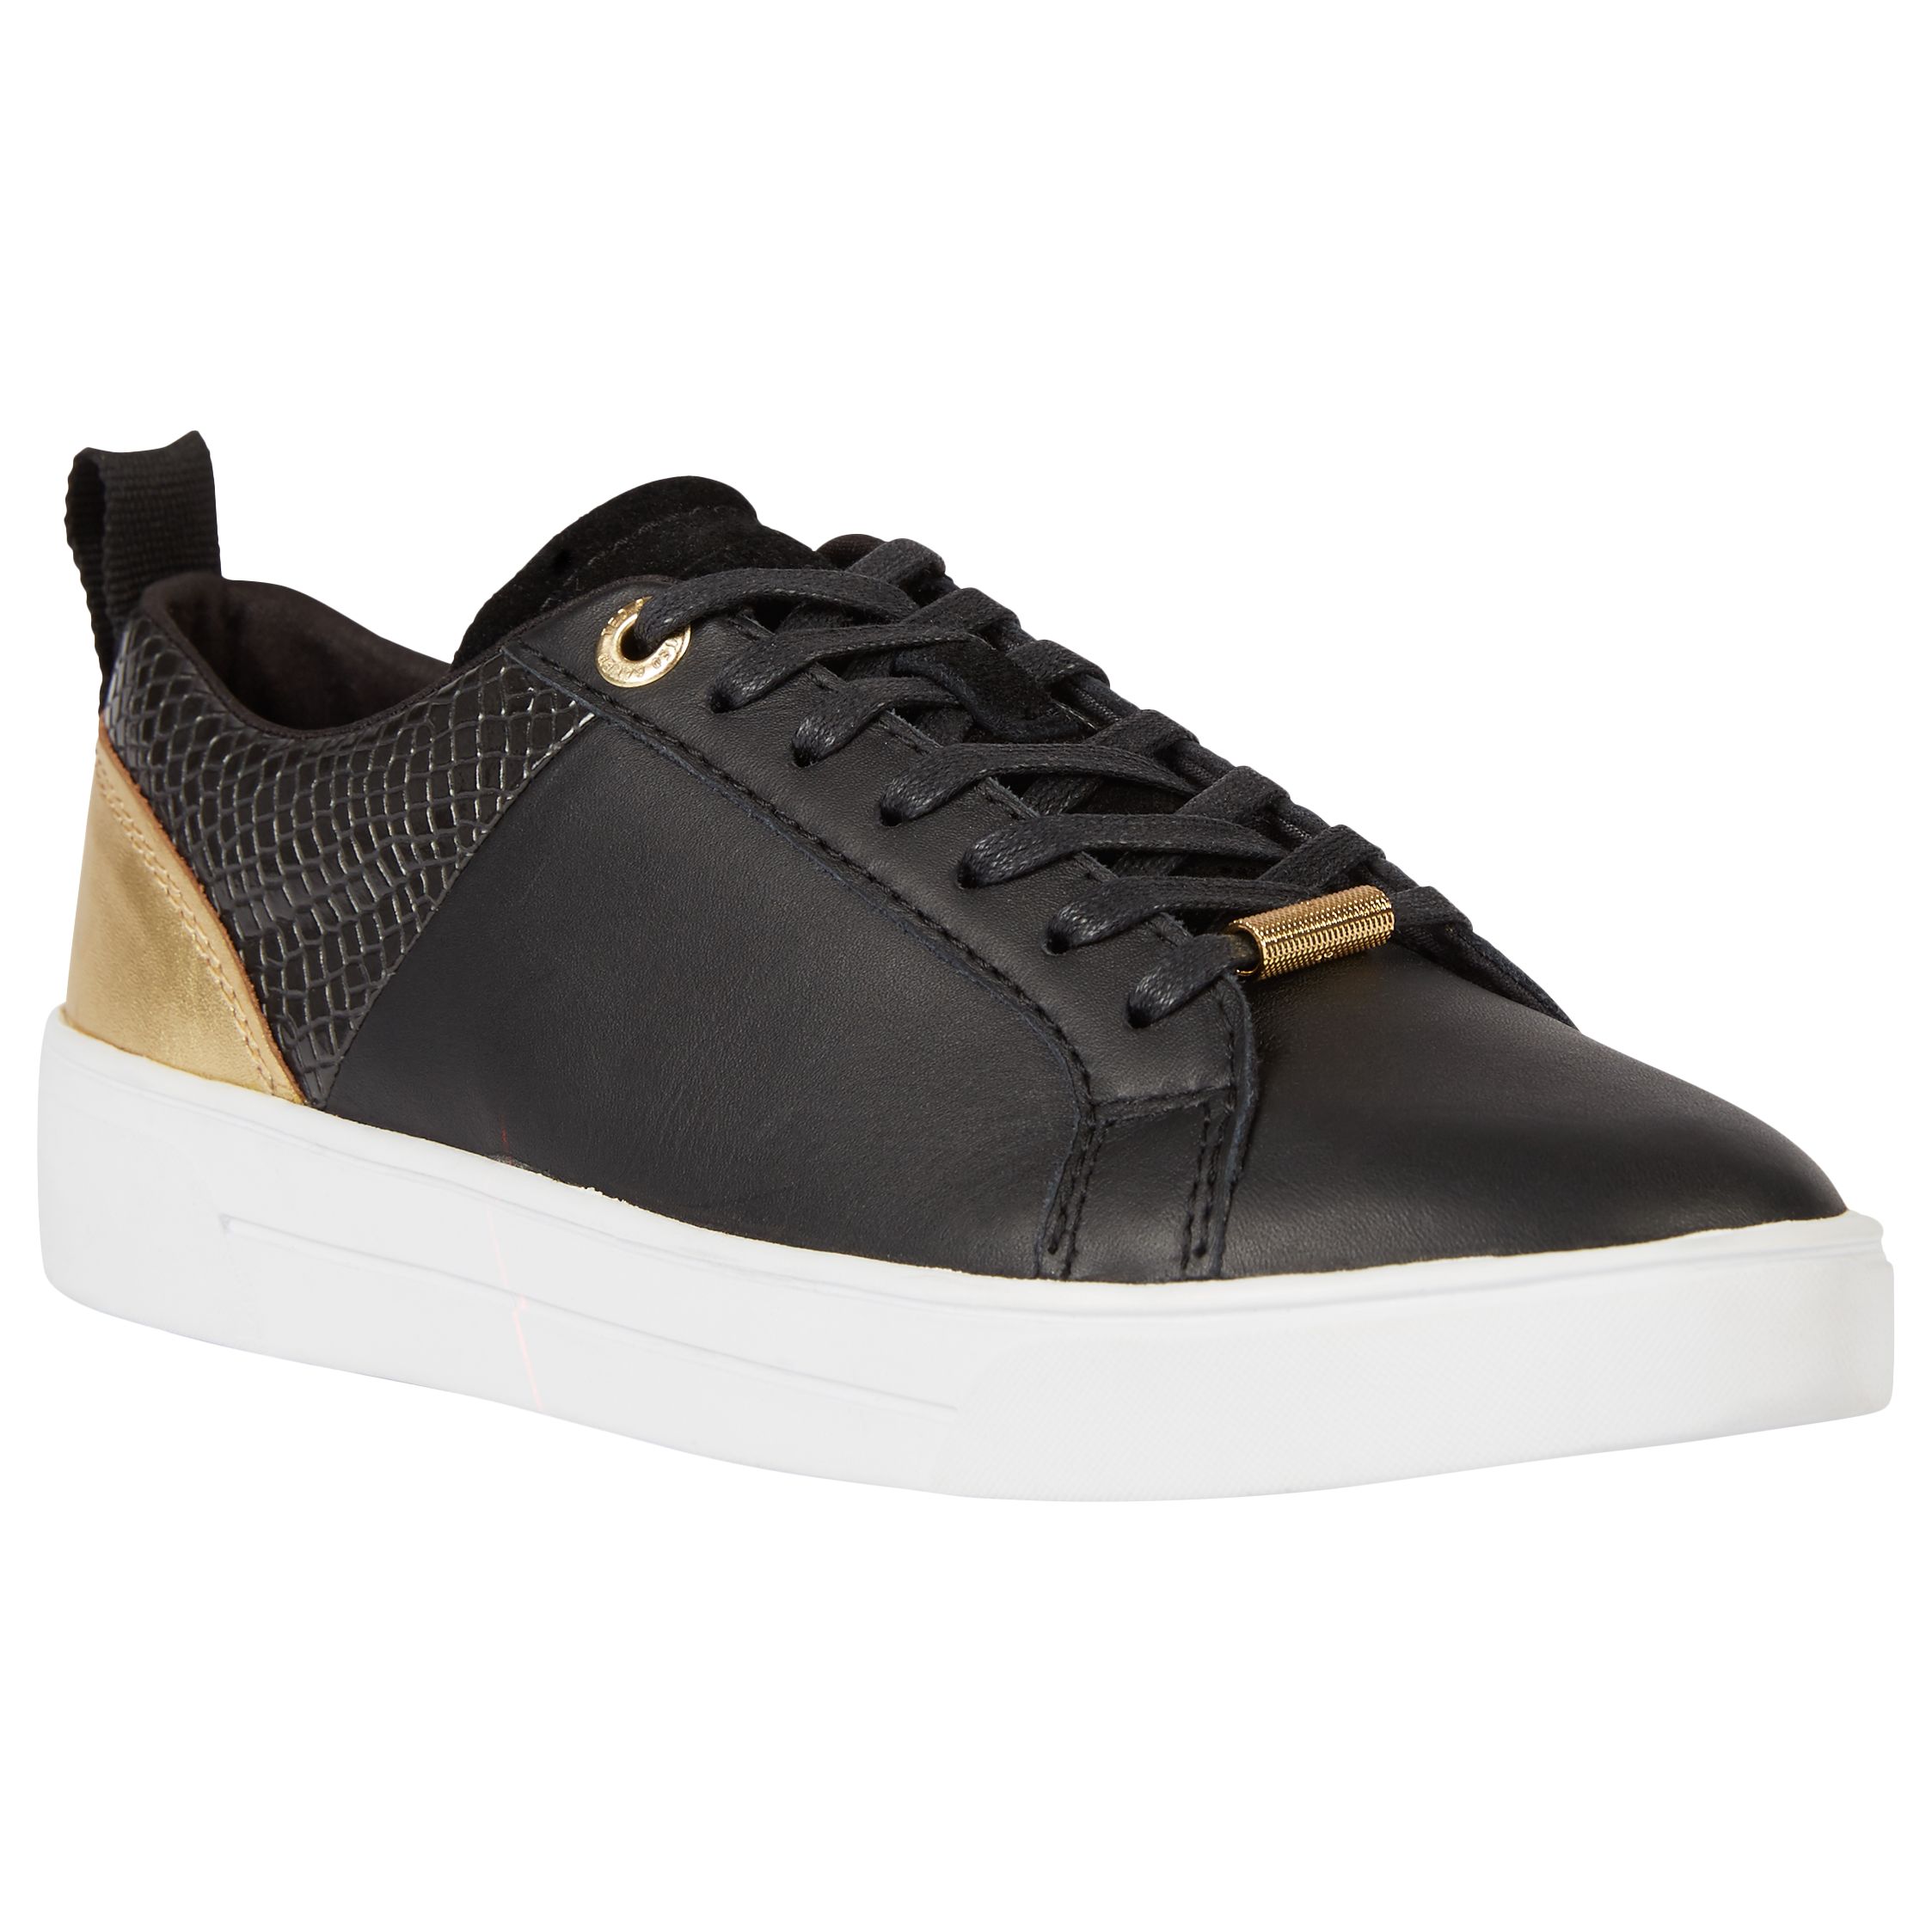 Ted Baker Kulei Lace Up Trainers